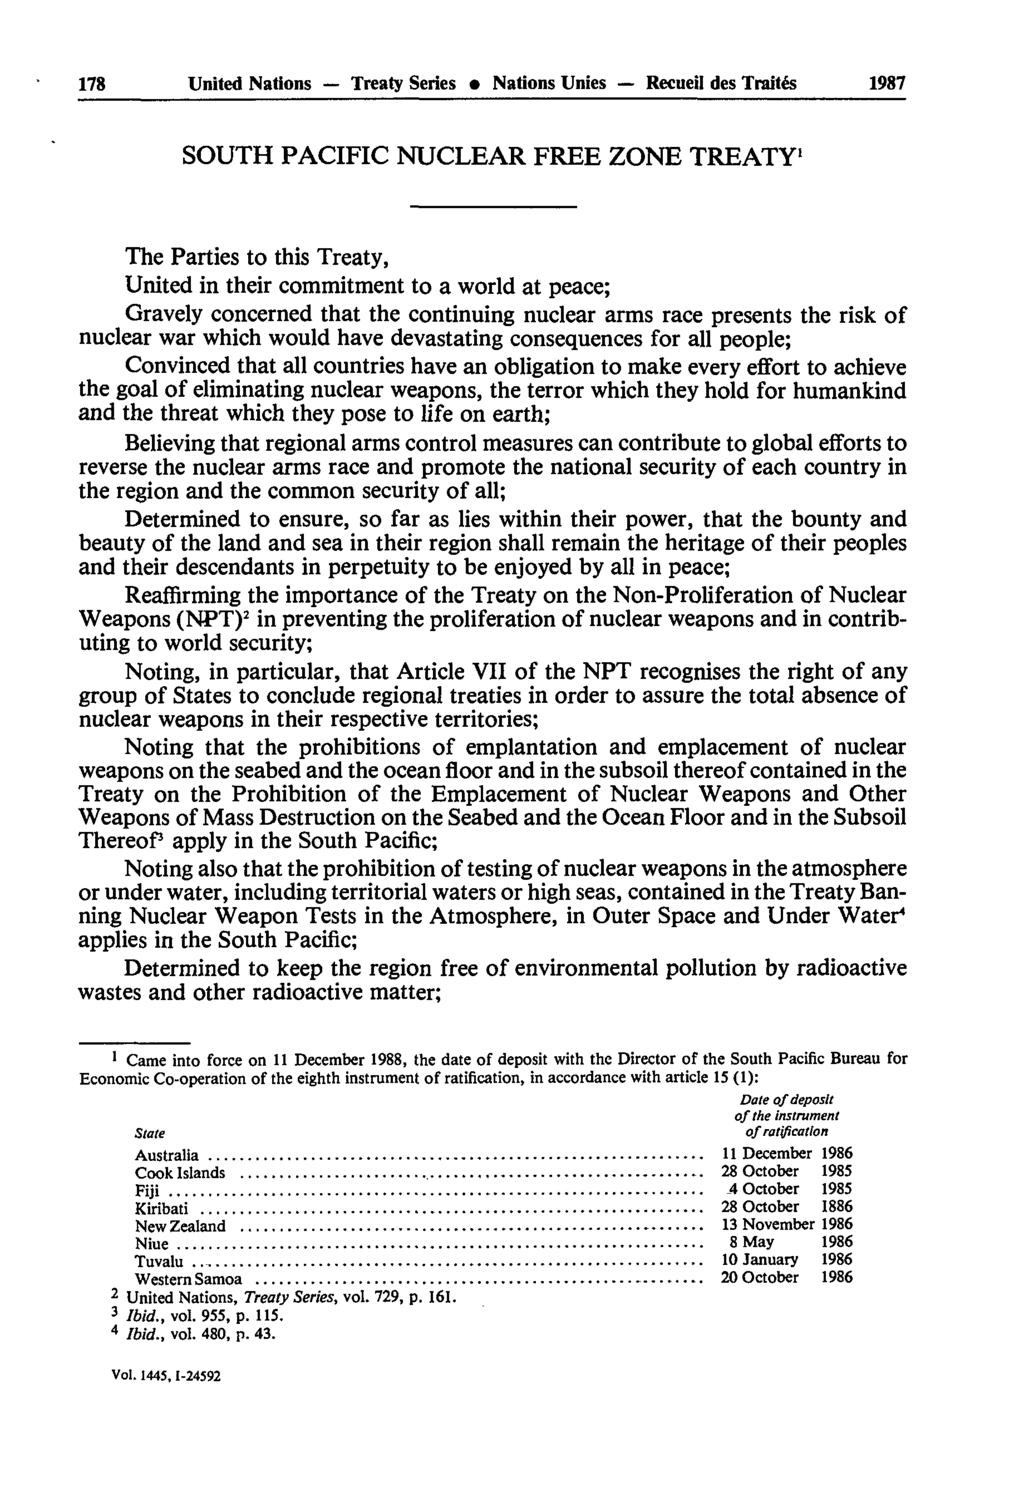 178 United Nations Treaty Series Nations Unies Recueil des Traités 1987 SOUTH PACIFIC NUCLEAR FREE ZONE TREATY1 The Parties to this Treaty, United in their commitment to a world at peace; Gravely